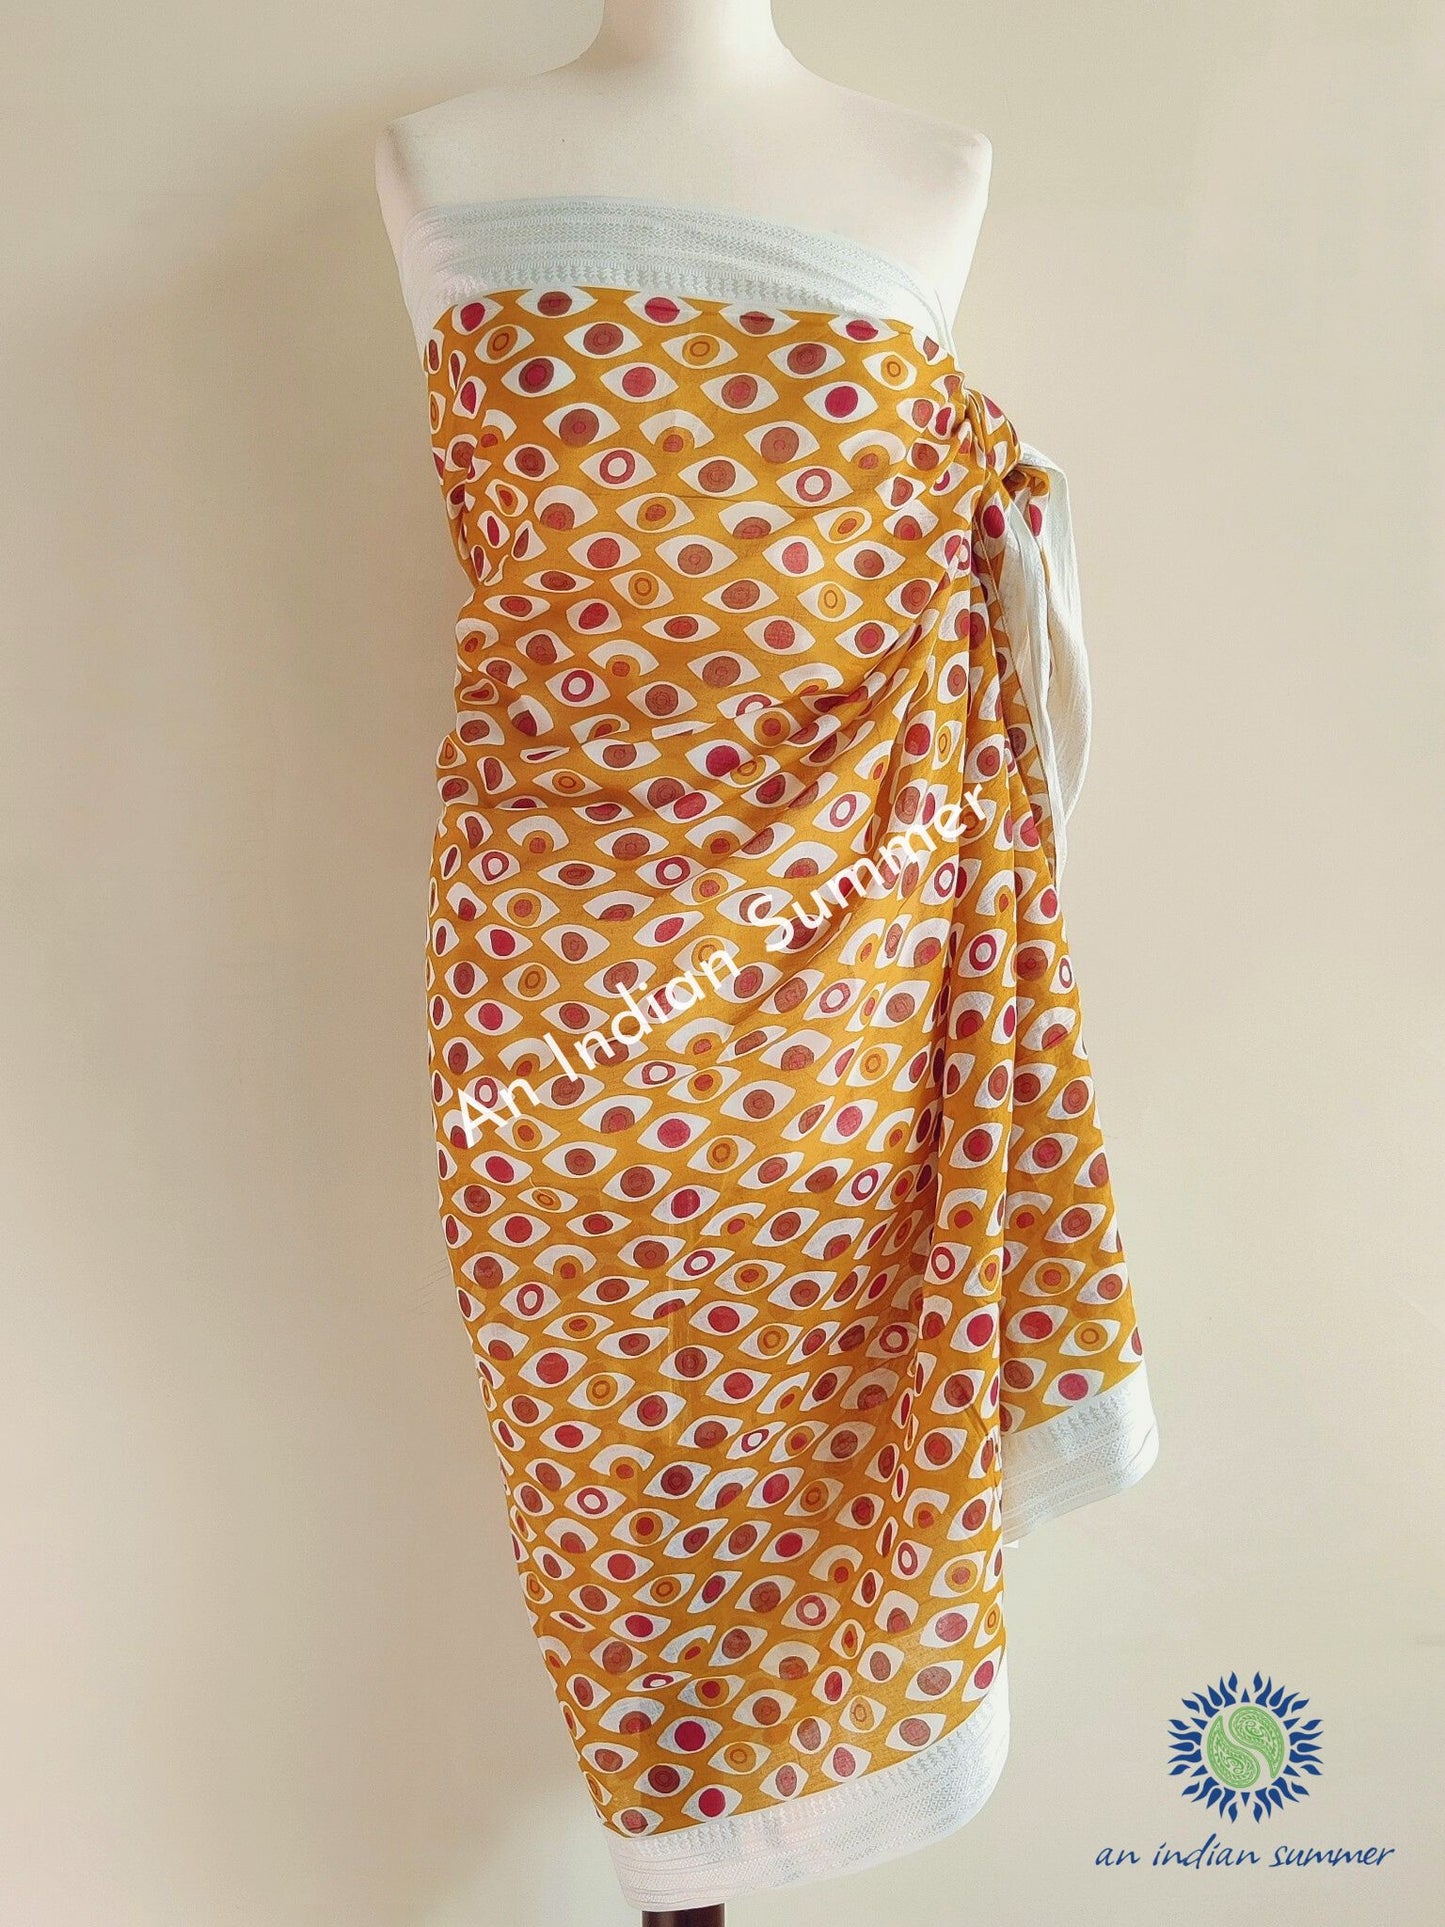 Evil Eye Woven Border Sarong Pareo | Mustard Yellow | Hand Block Printed | Soft Cotton Voile | An Indian Summer | Seasonless Timeless Sustainable Ethical Authentic Artisan Conscious Clothing Lifestyle Brand